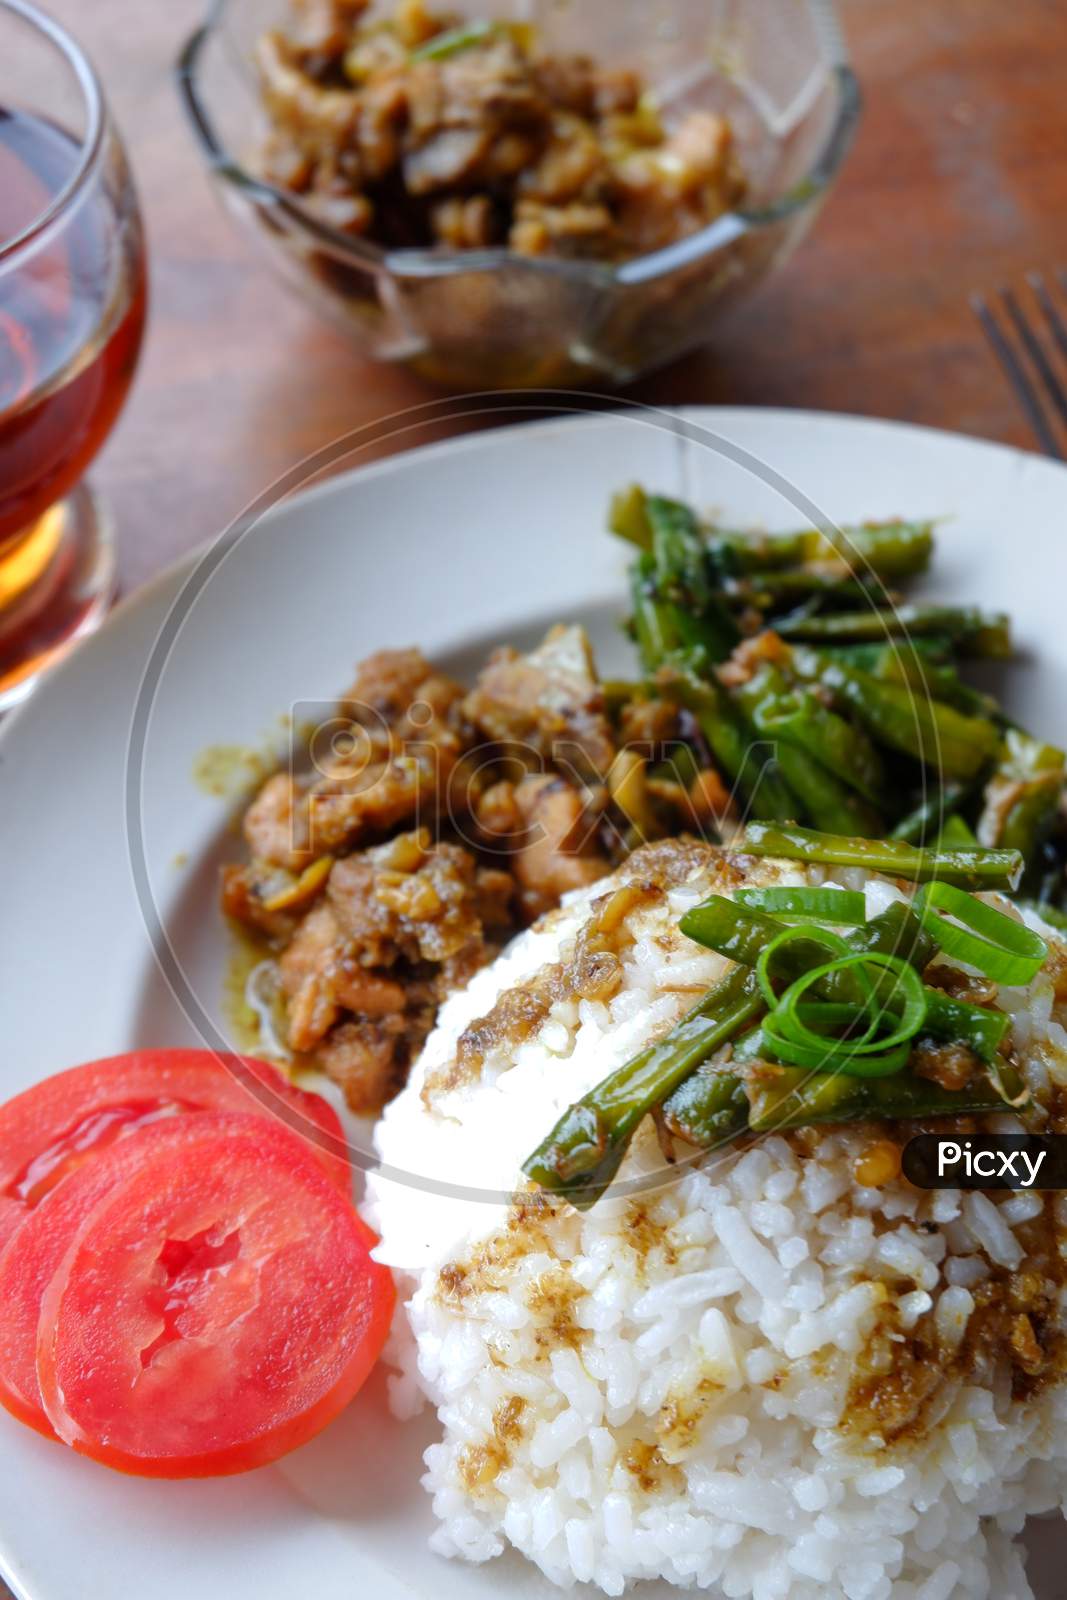 Heavy Food Photos Include Rice, Peanuts, Meat And Tea